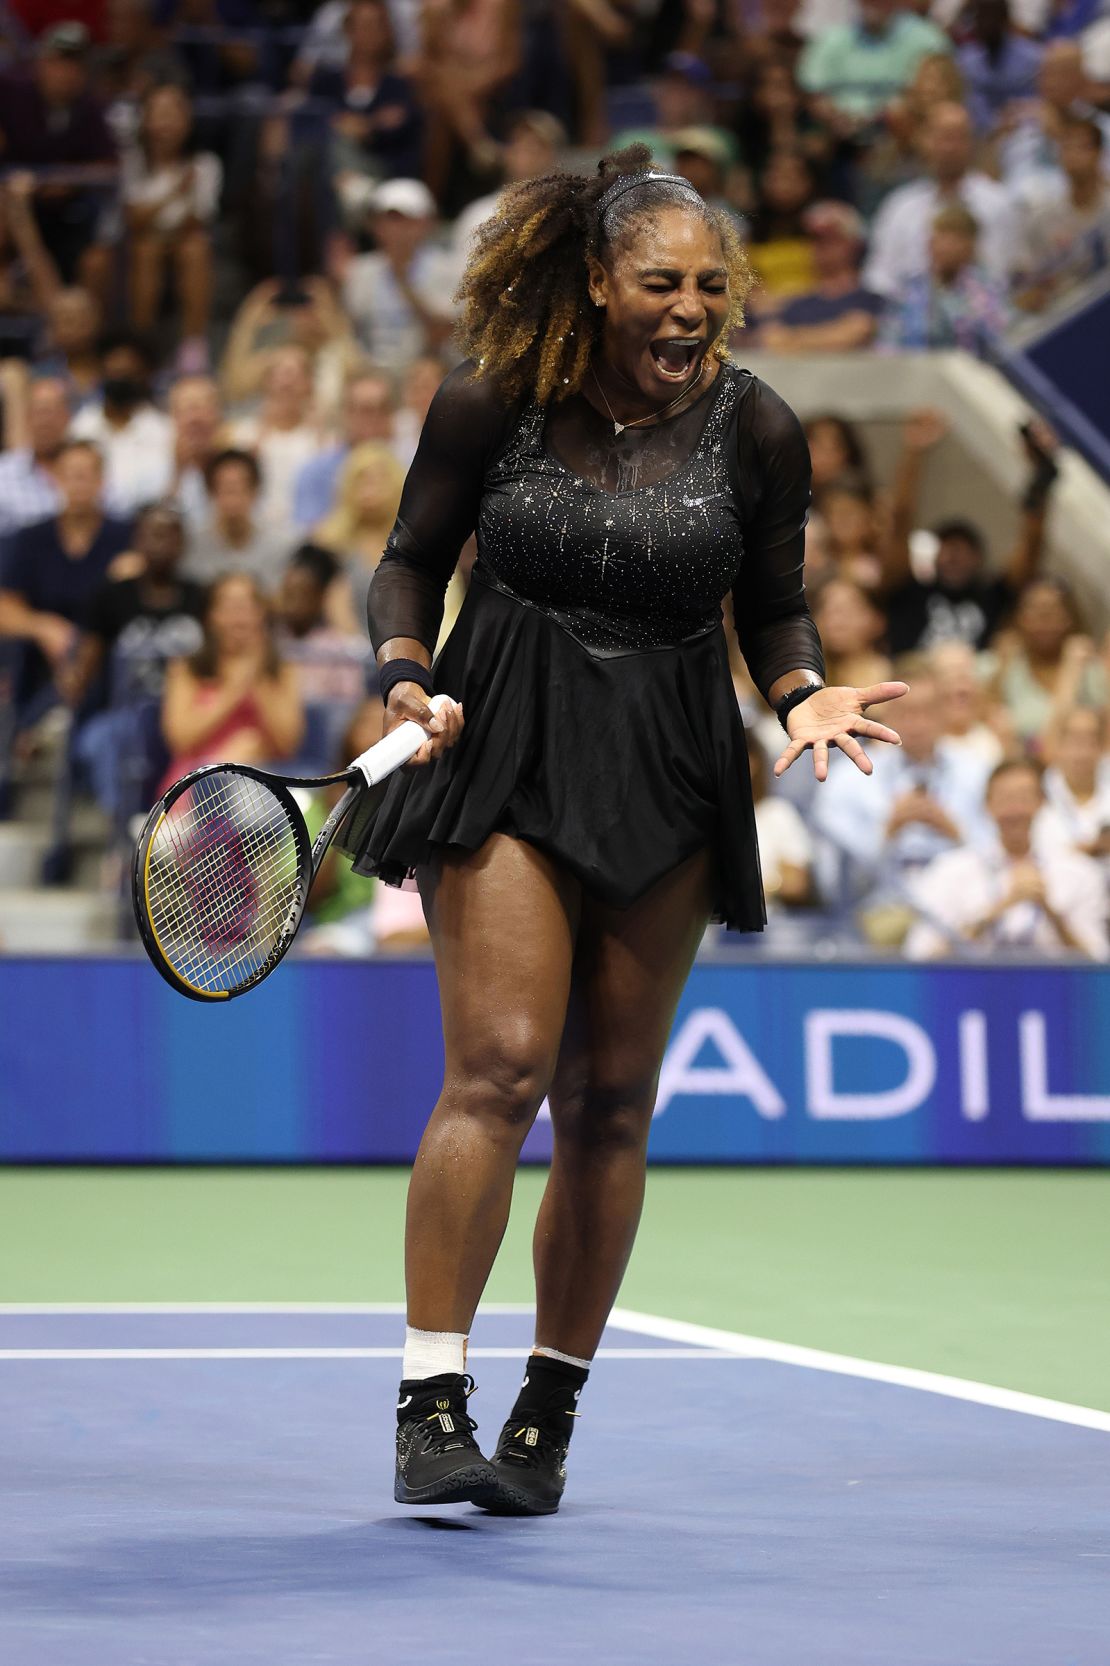 Serena Williams reacts after winning the first set against Danka Kovinić during their first round match at the 2022 US Open on August 29 in New York.